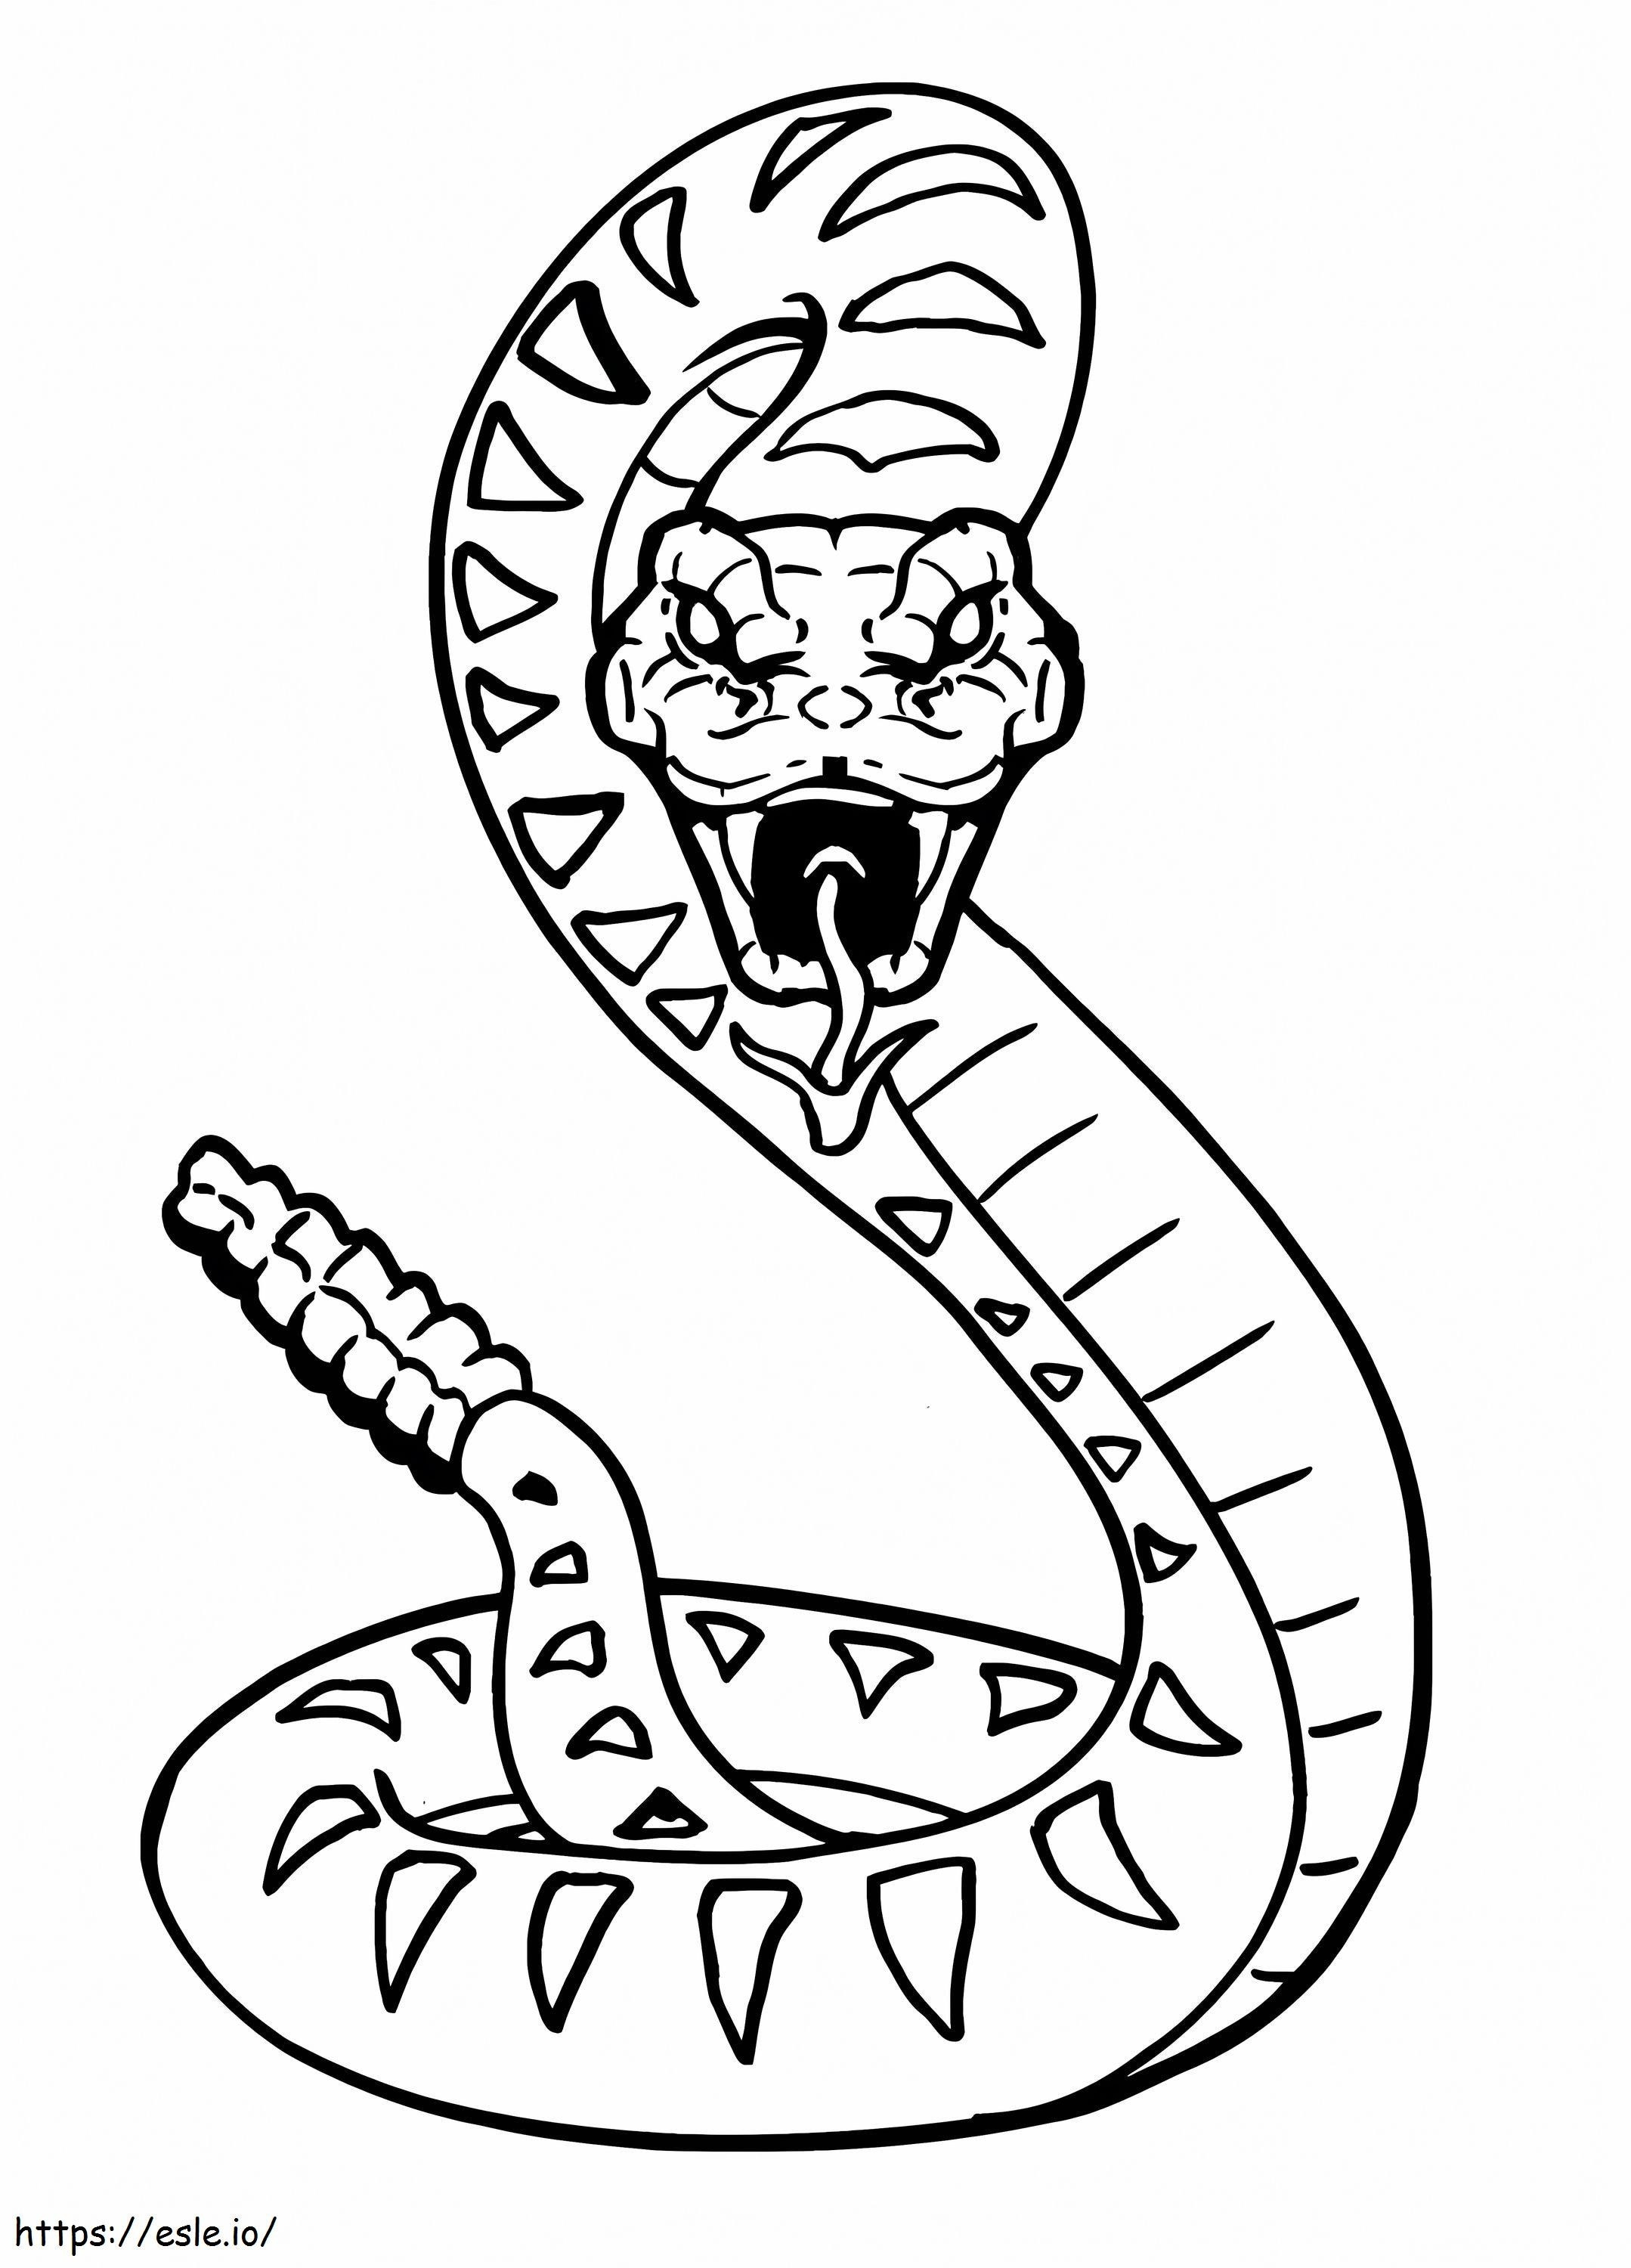 Awesome Snake coloring page